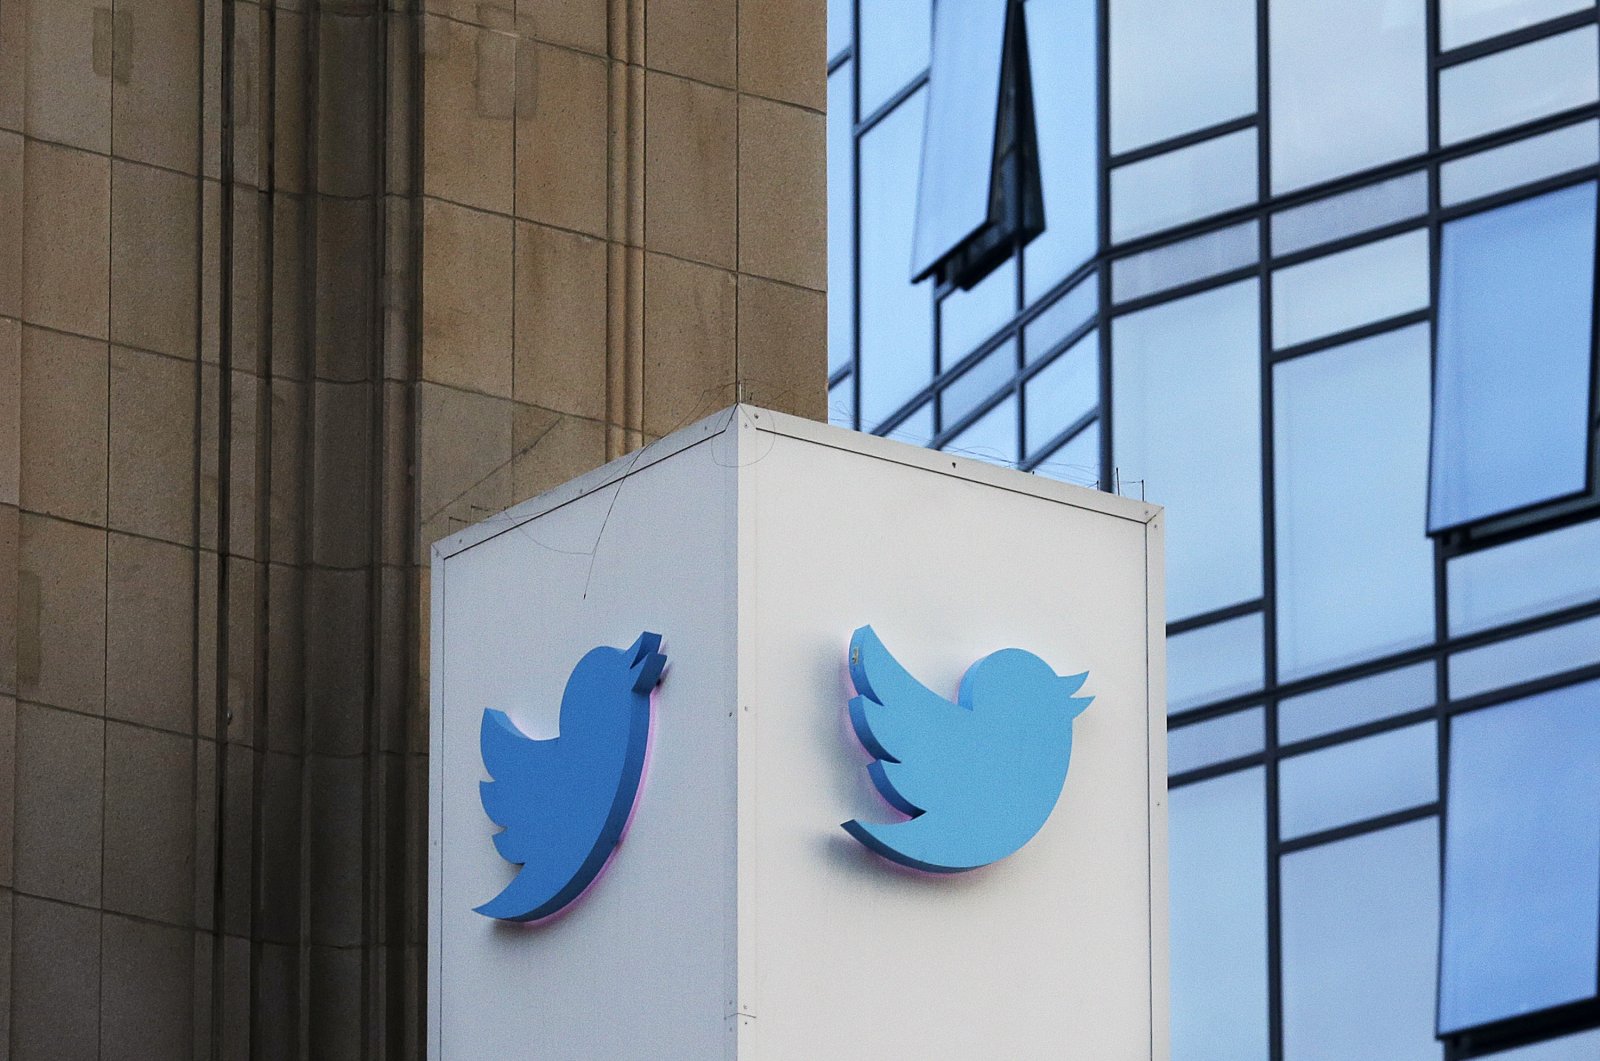 A Twitter sign seen outside of the company's headquarters in San Francisco, Oct. 26, 2016. (AP Photo)